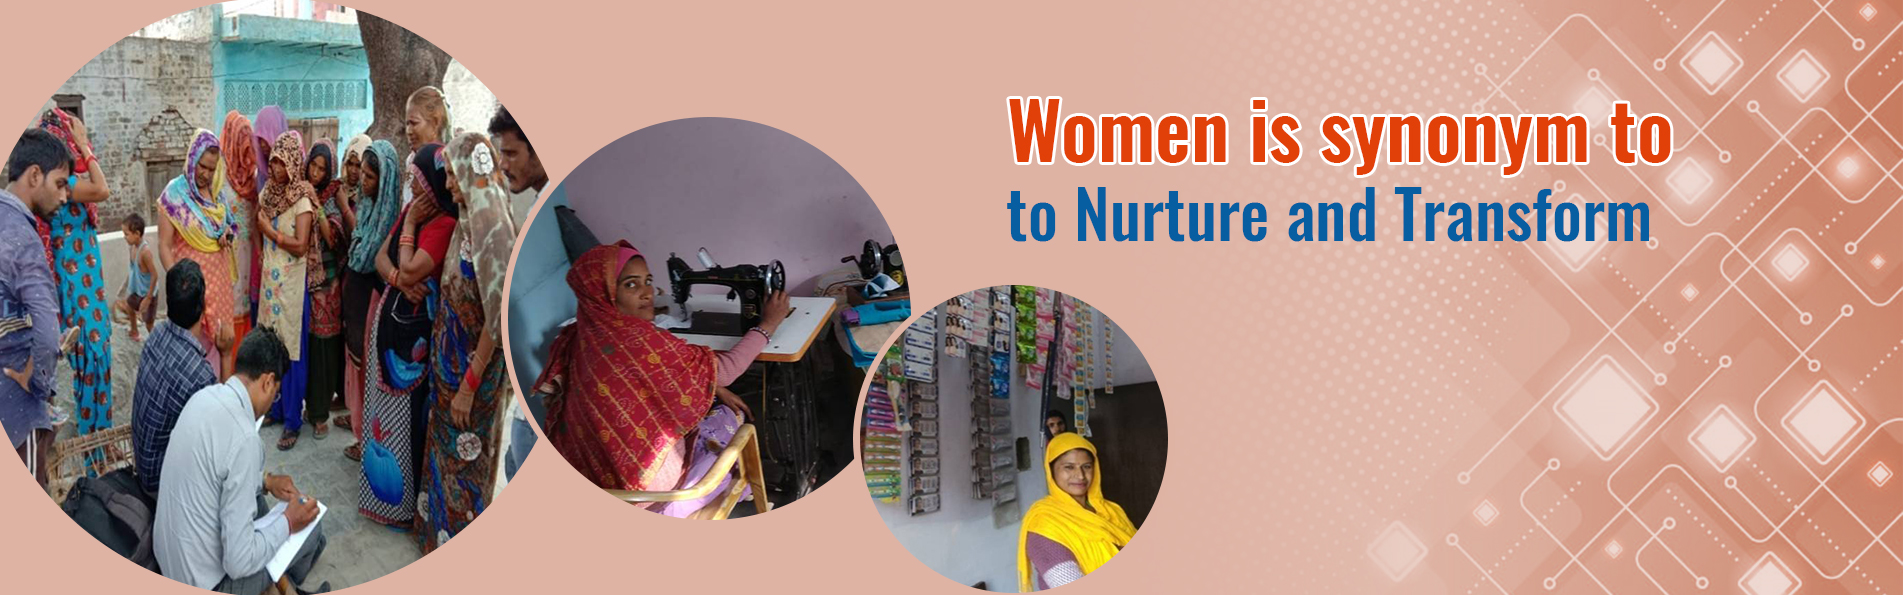 Women is the synonym to Create, Nurture and Transform | women empowerment